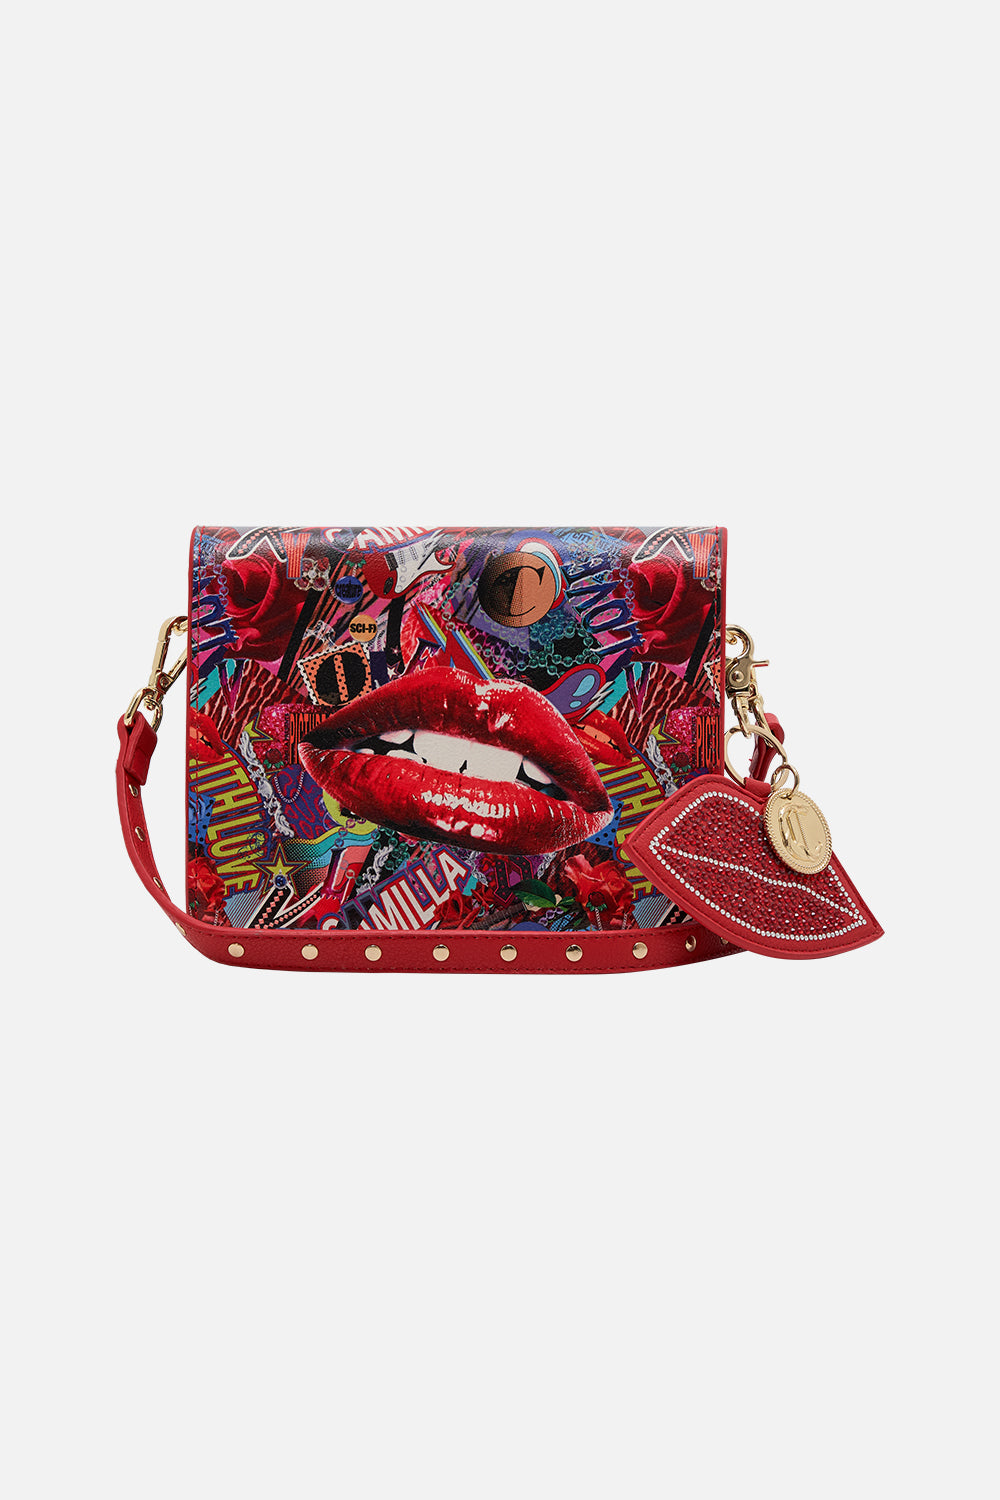 Front product view CAMILLA cross body bag in multicoloured Radical Rebirth print